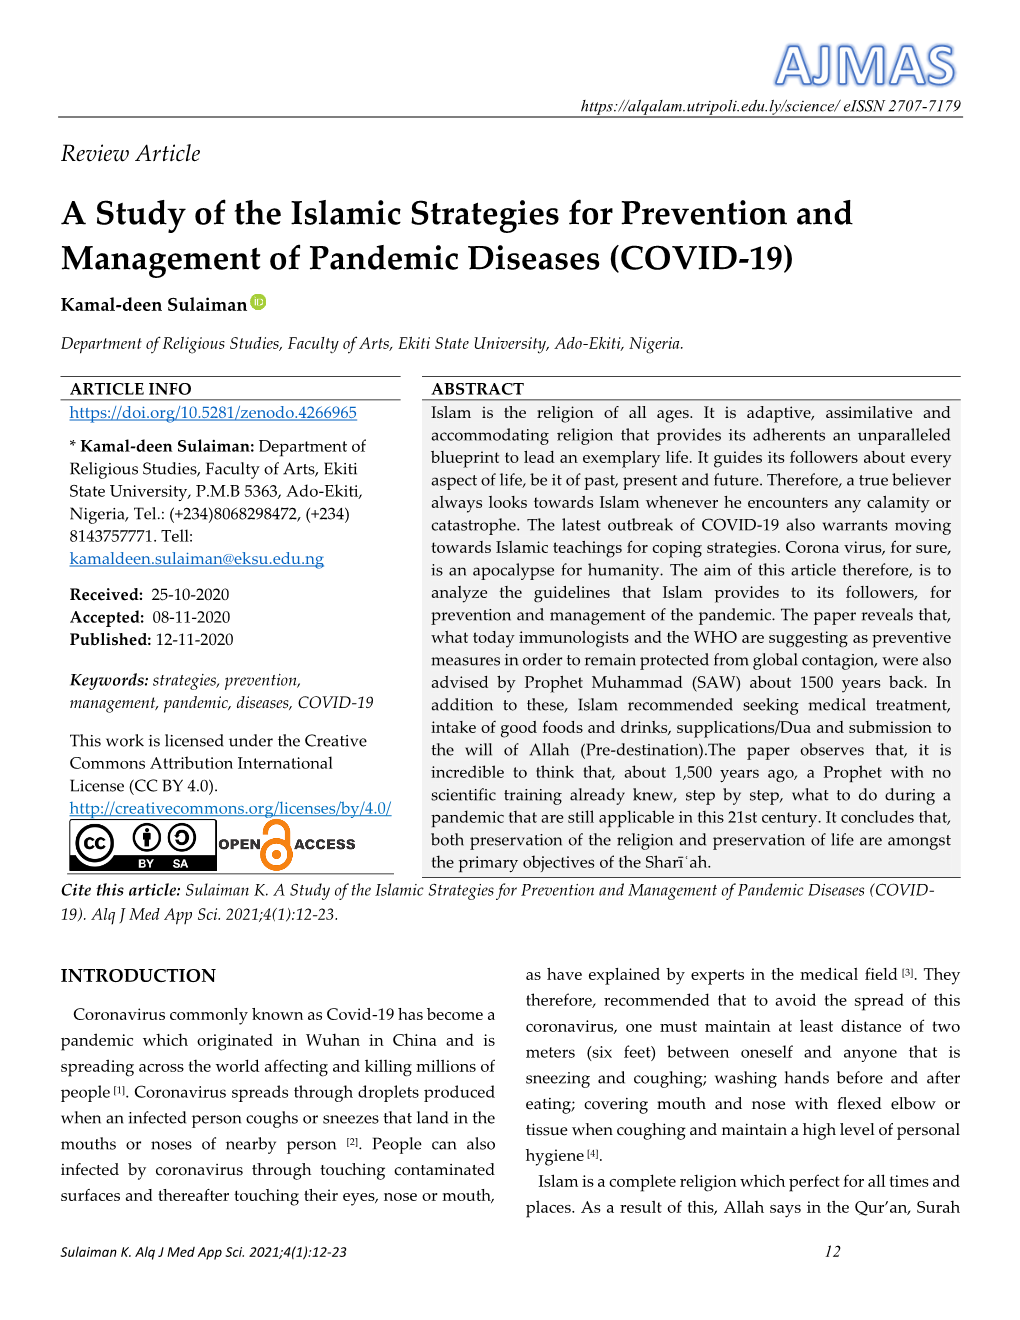 A Study of the Islamic Strategies for Prevention and Management of Pandemic Diseases (COVID-19)